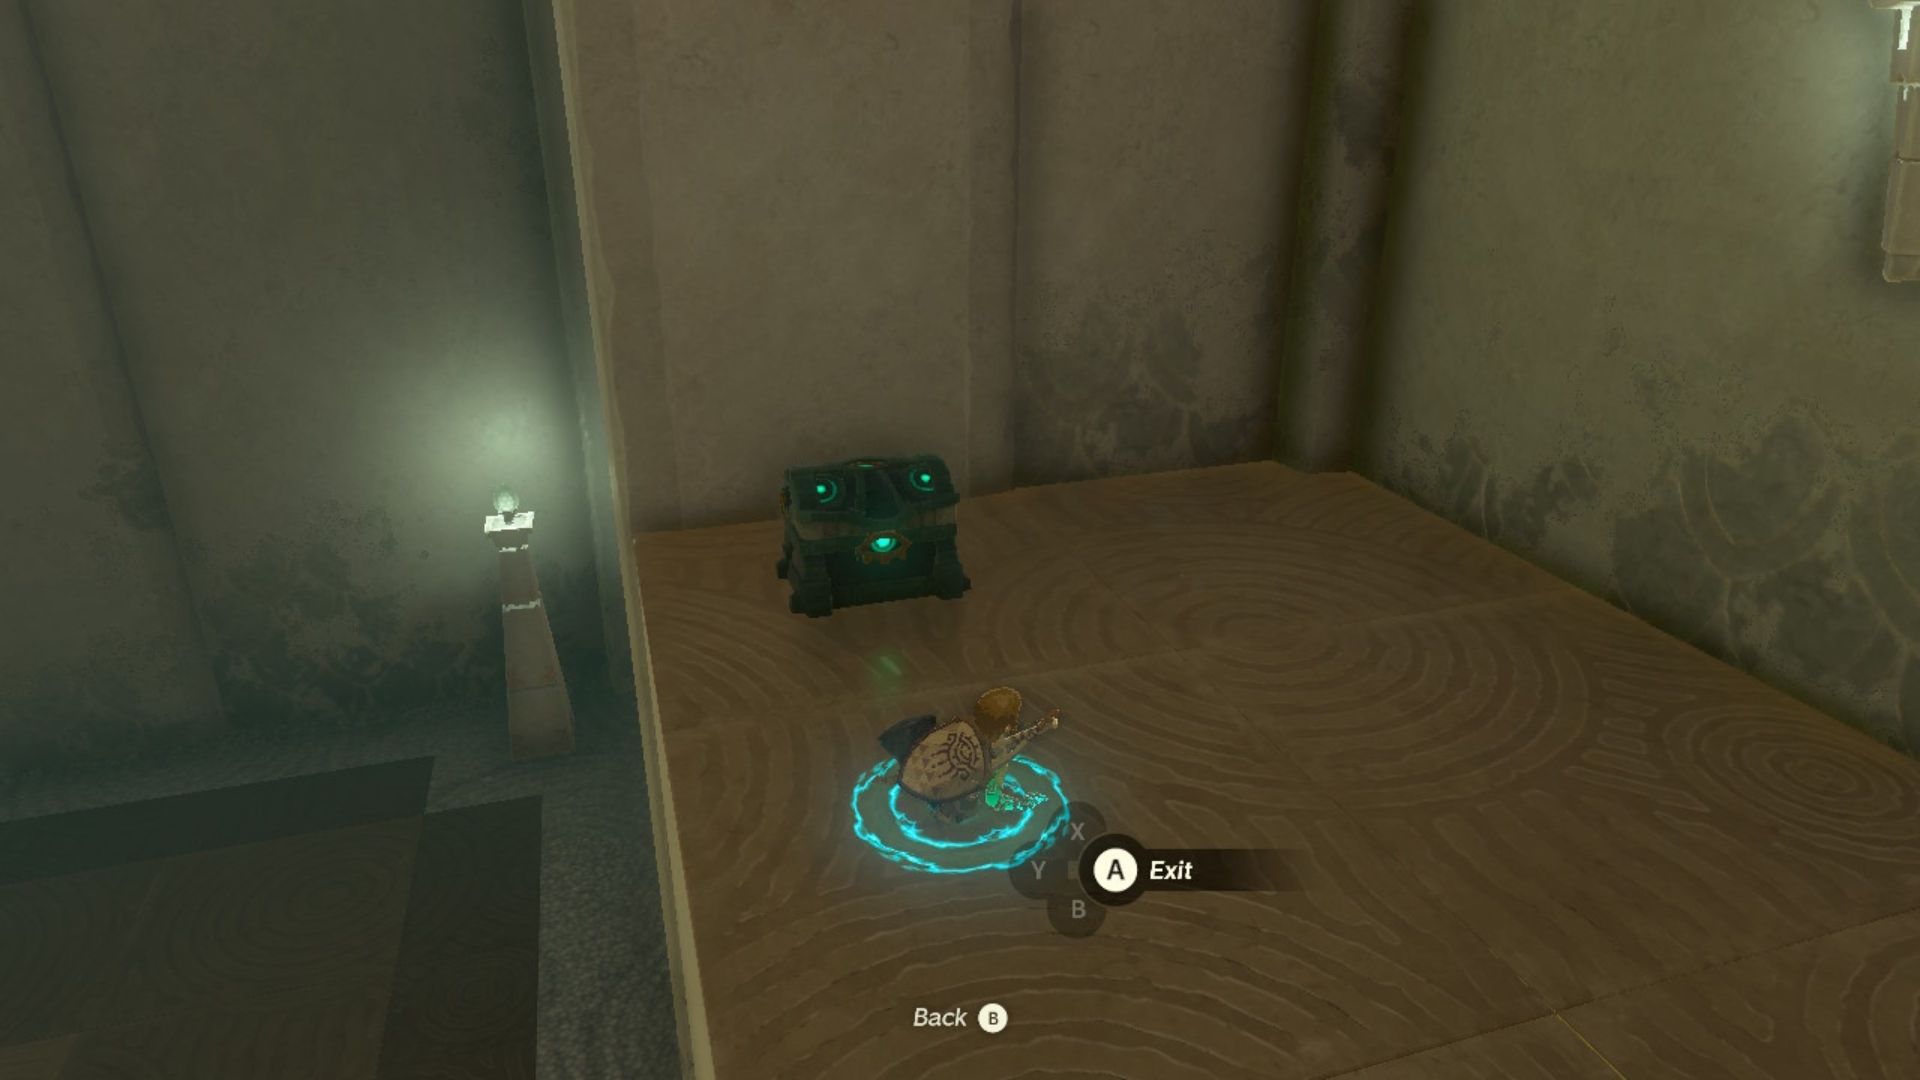 Link rising up out of the floor in front of a chest on a platform